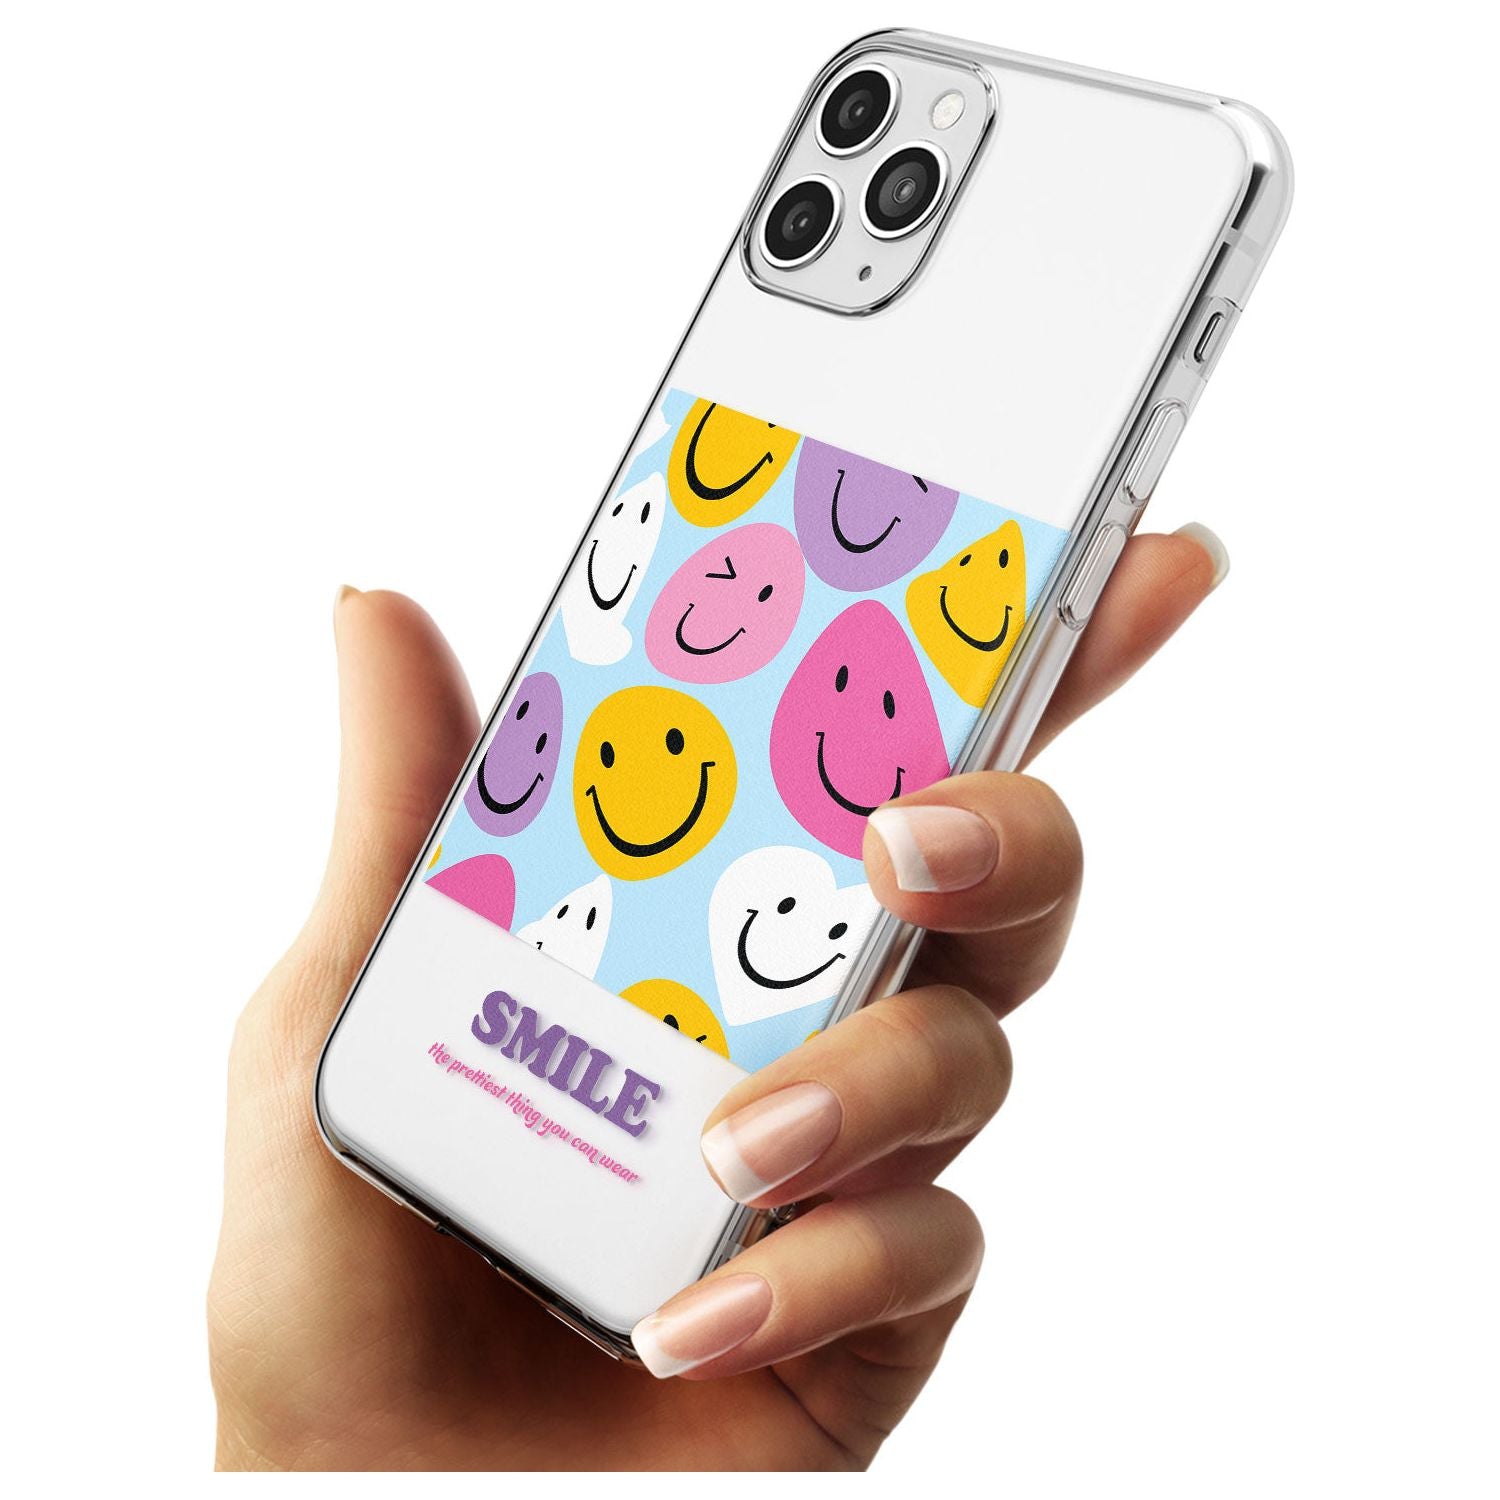 A Smile Slim TPU Phone Case for iPhone 11 Pro Max